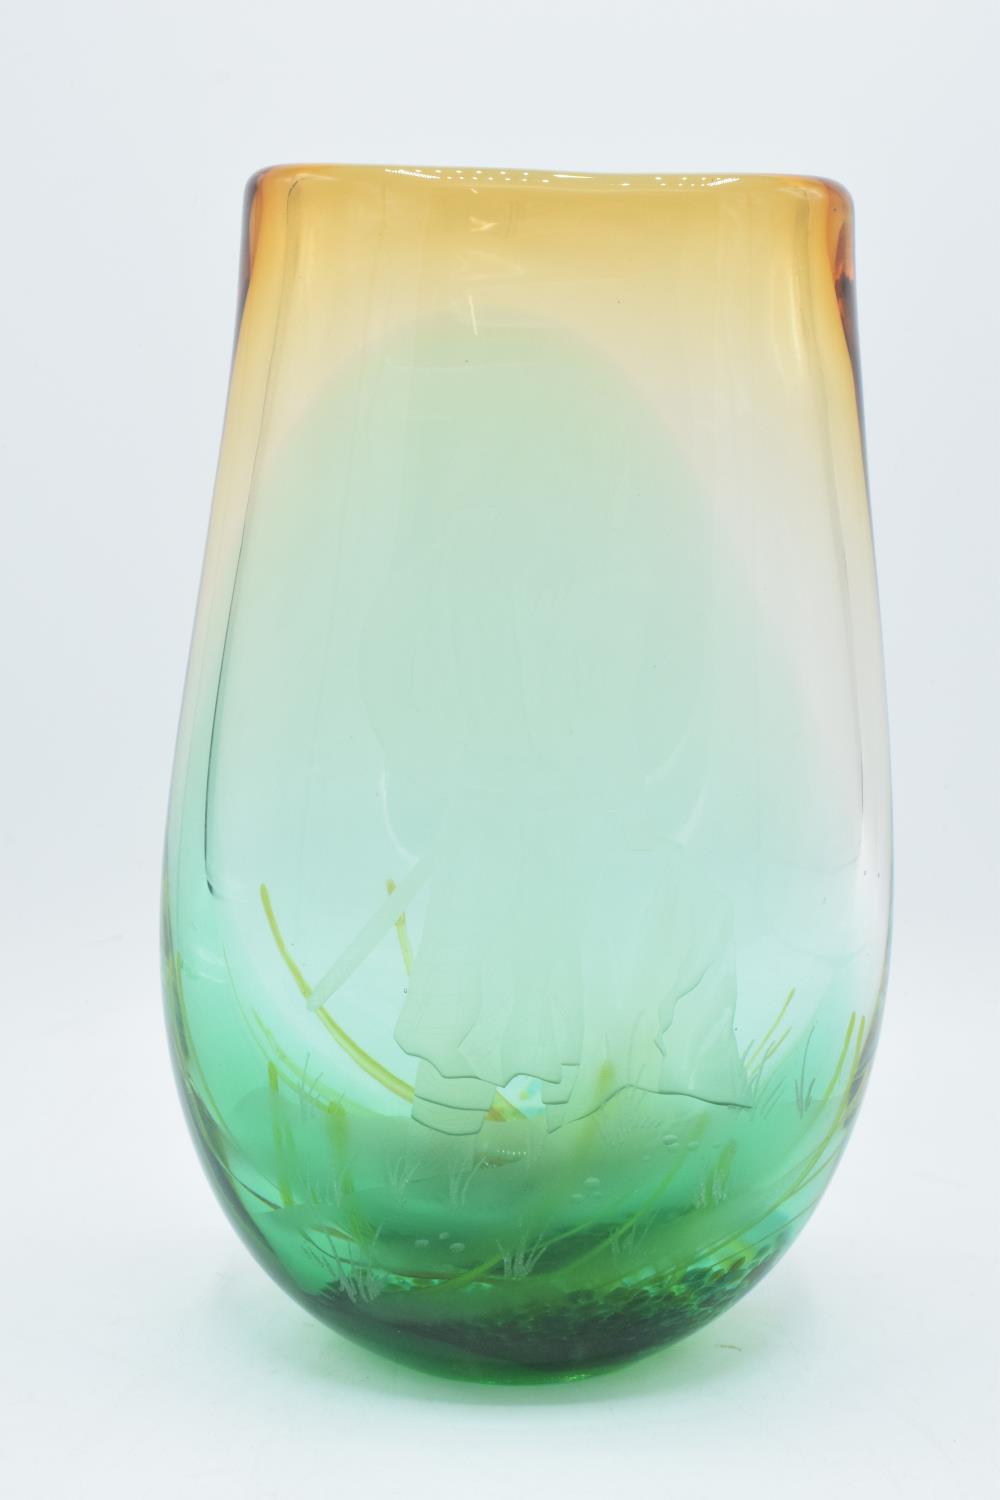 Caithness one-off glass vase 'Highlander' 2002, signed to base by the artist. 27cm tall. - Image 2 of 10